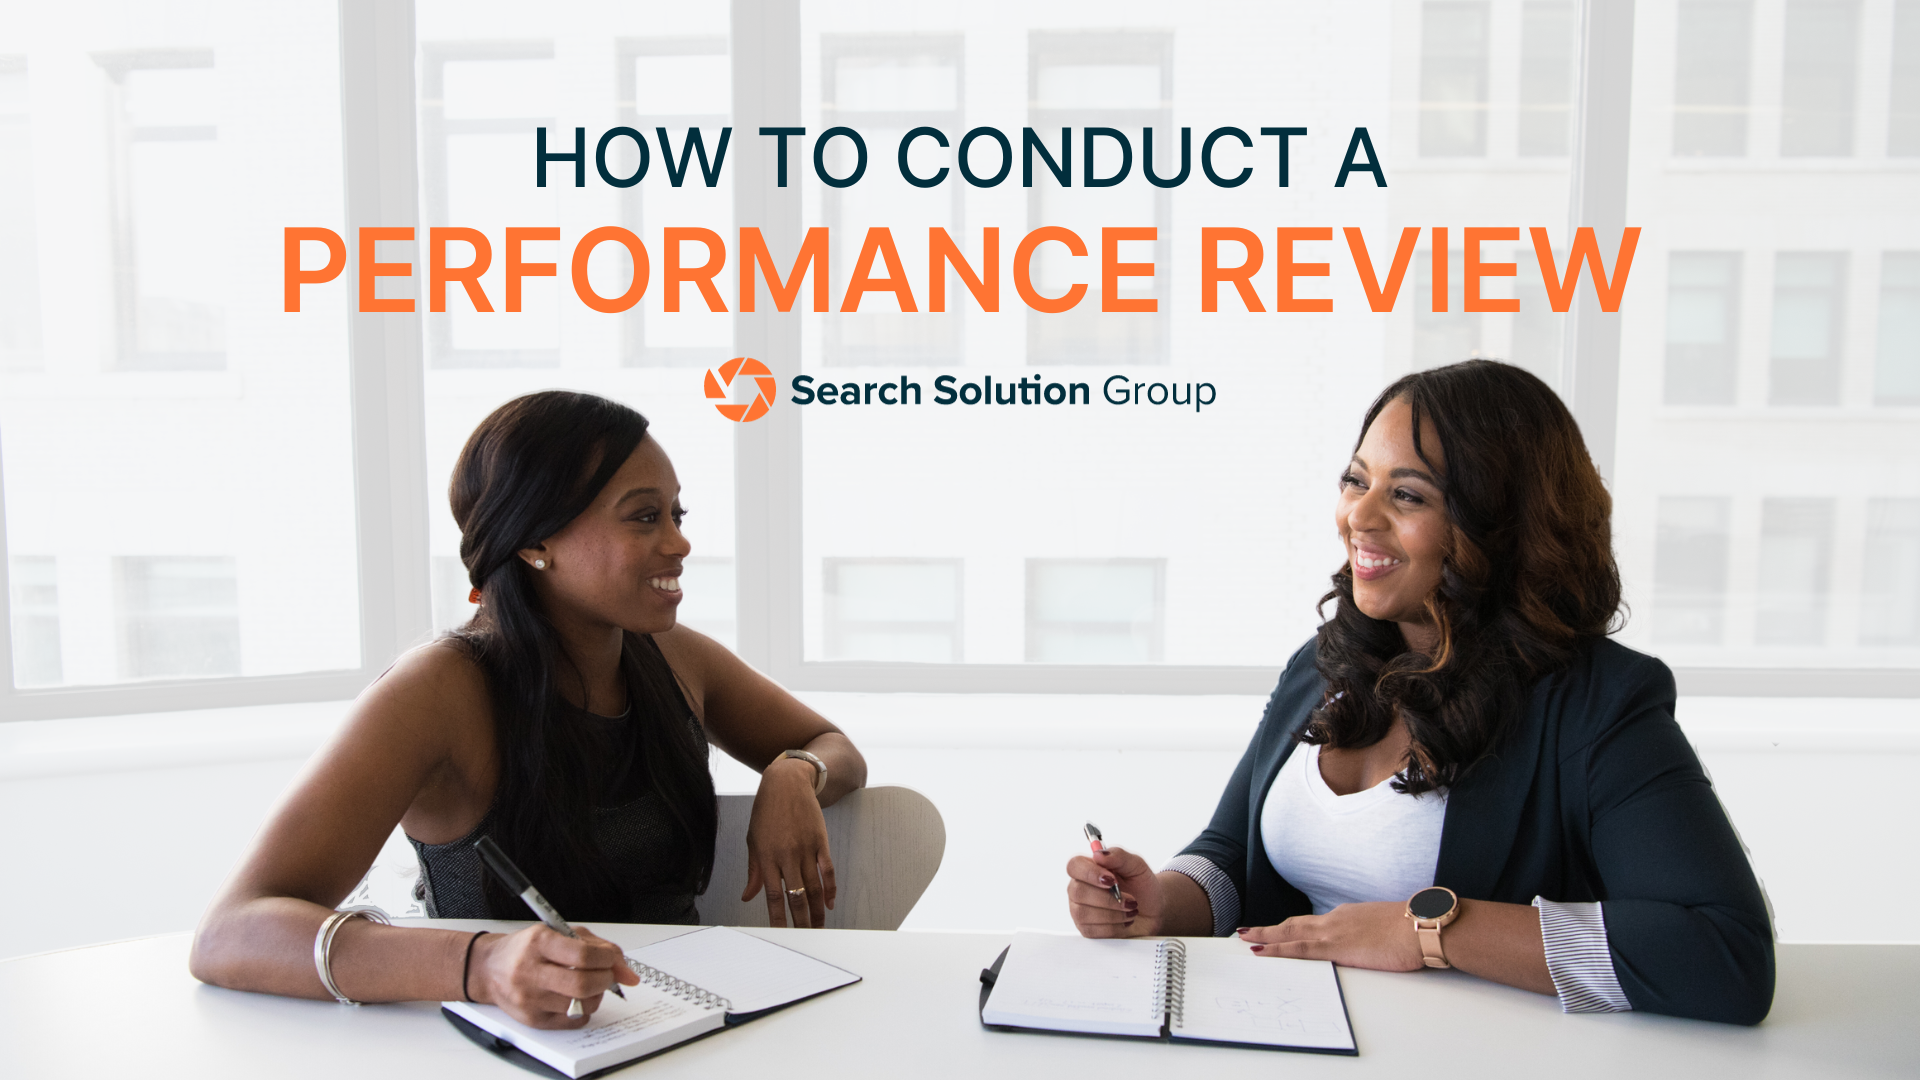 20 Tips For Conducting Performance Reviews: A Guide for Leadership 